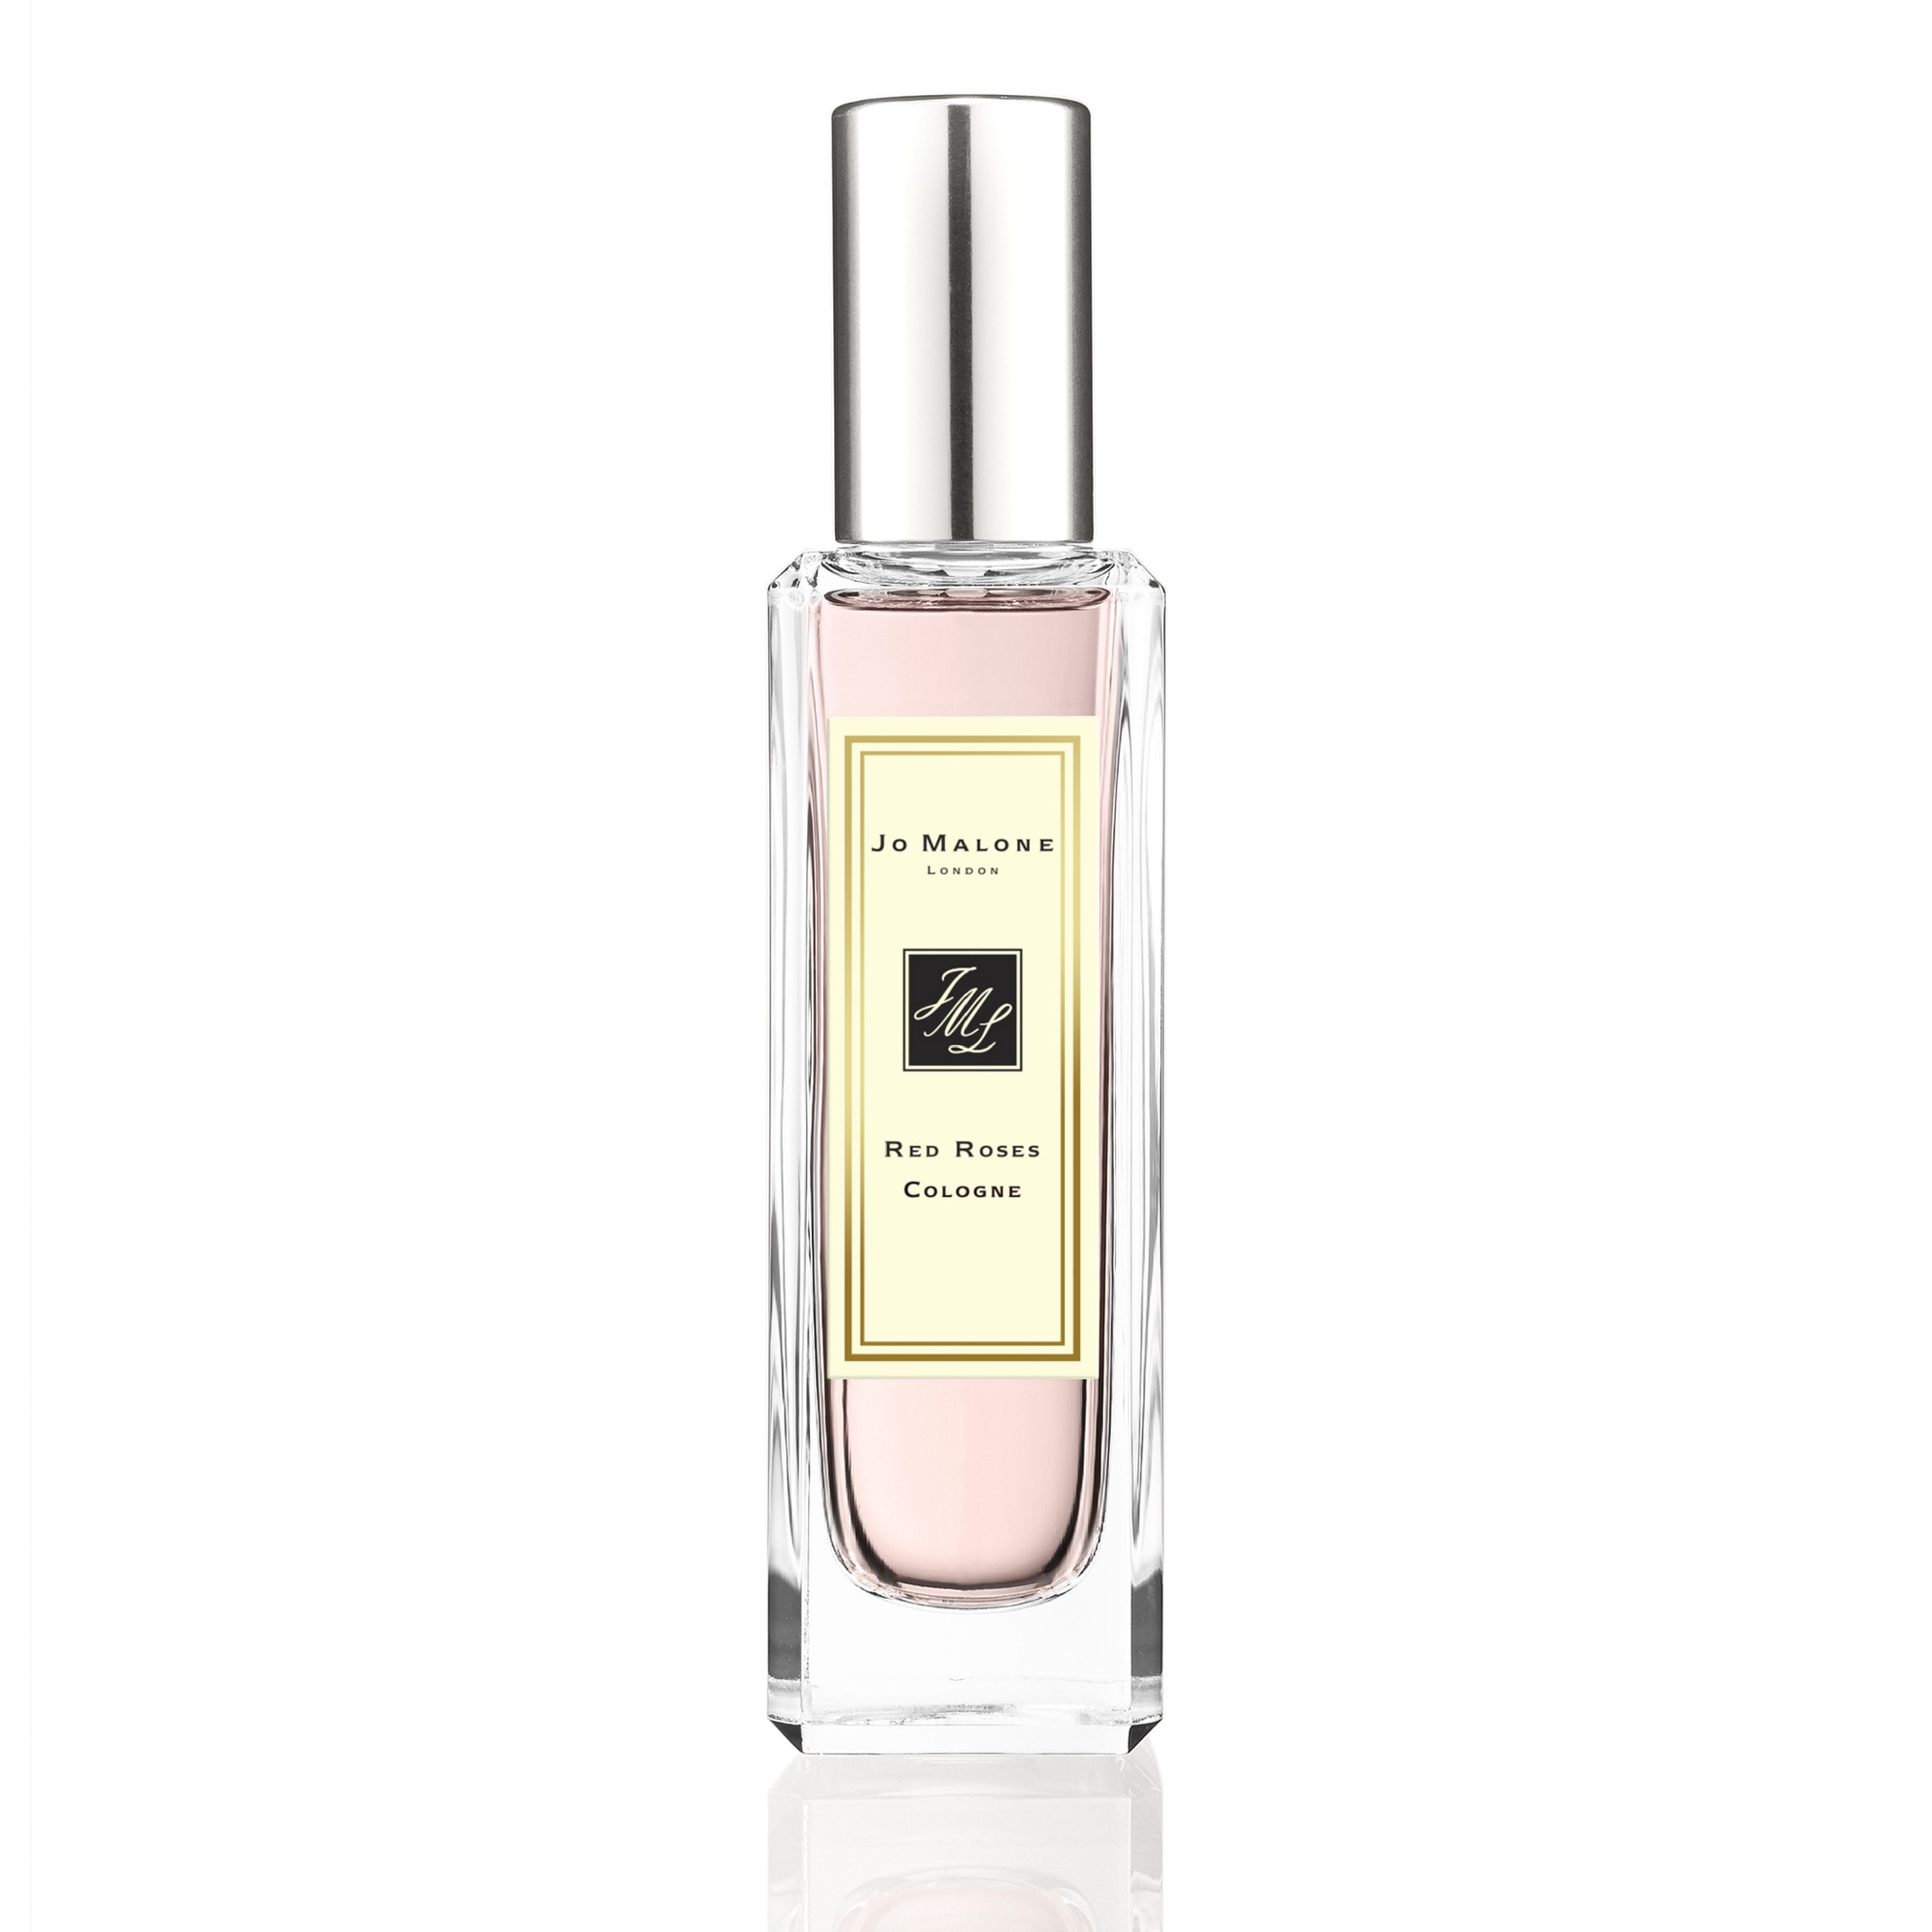 Jo Malone Red Roses Cologne 1